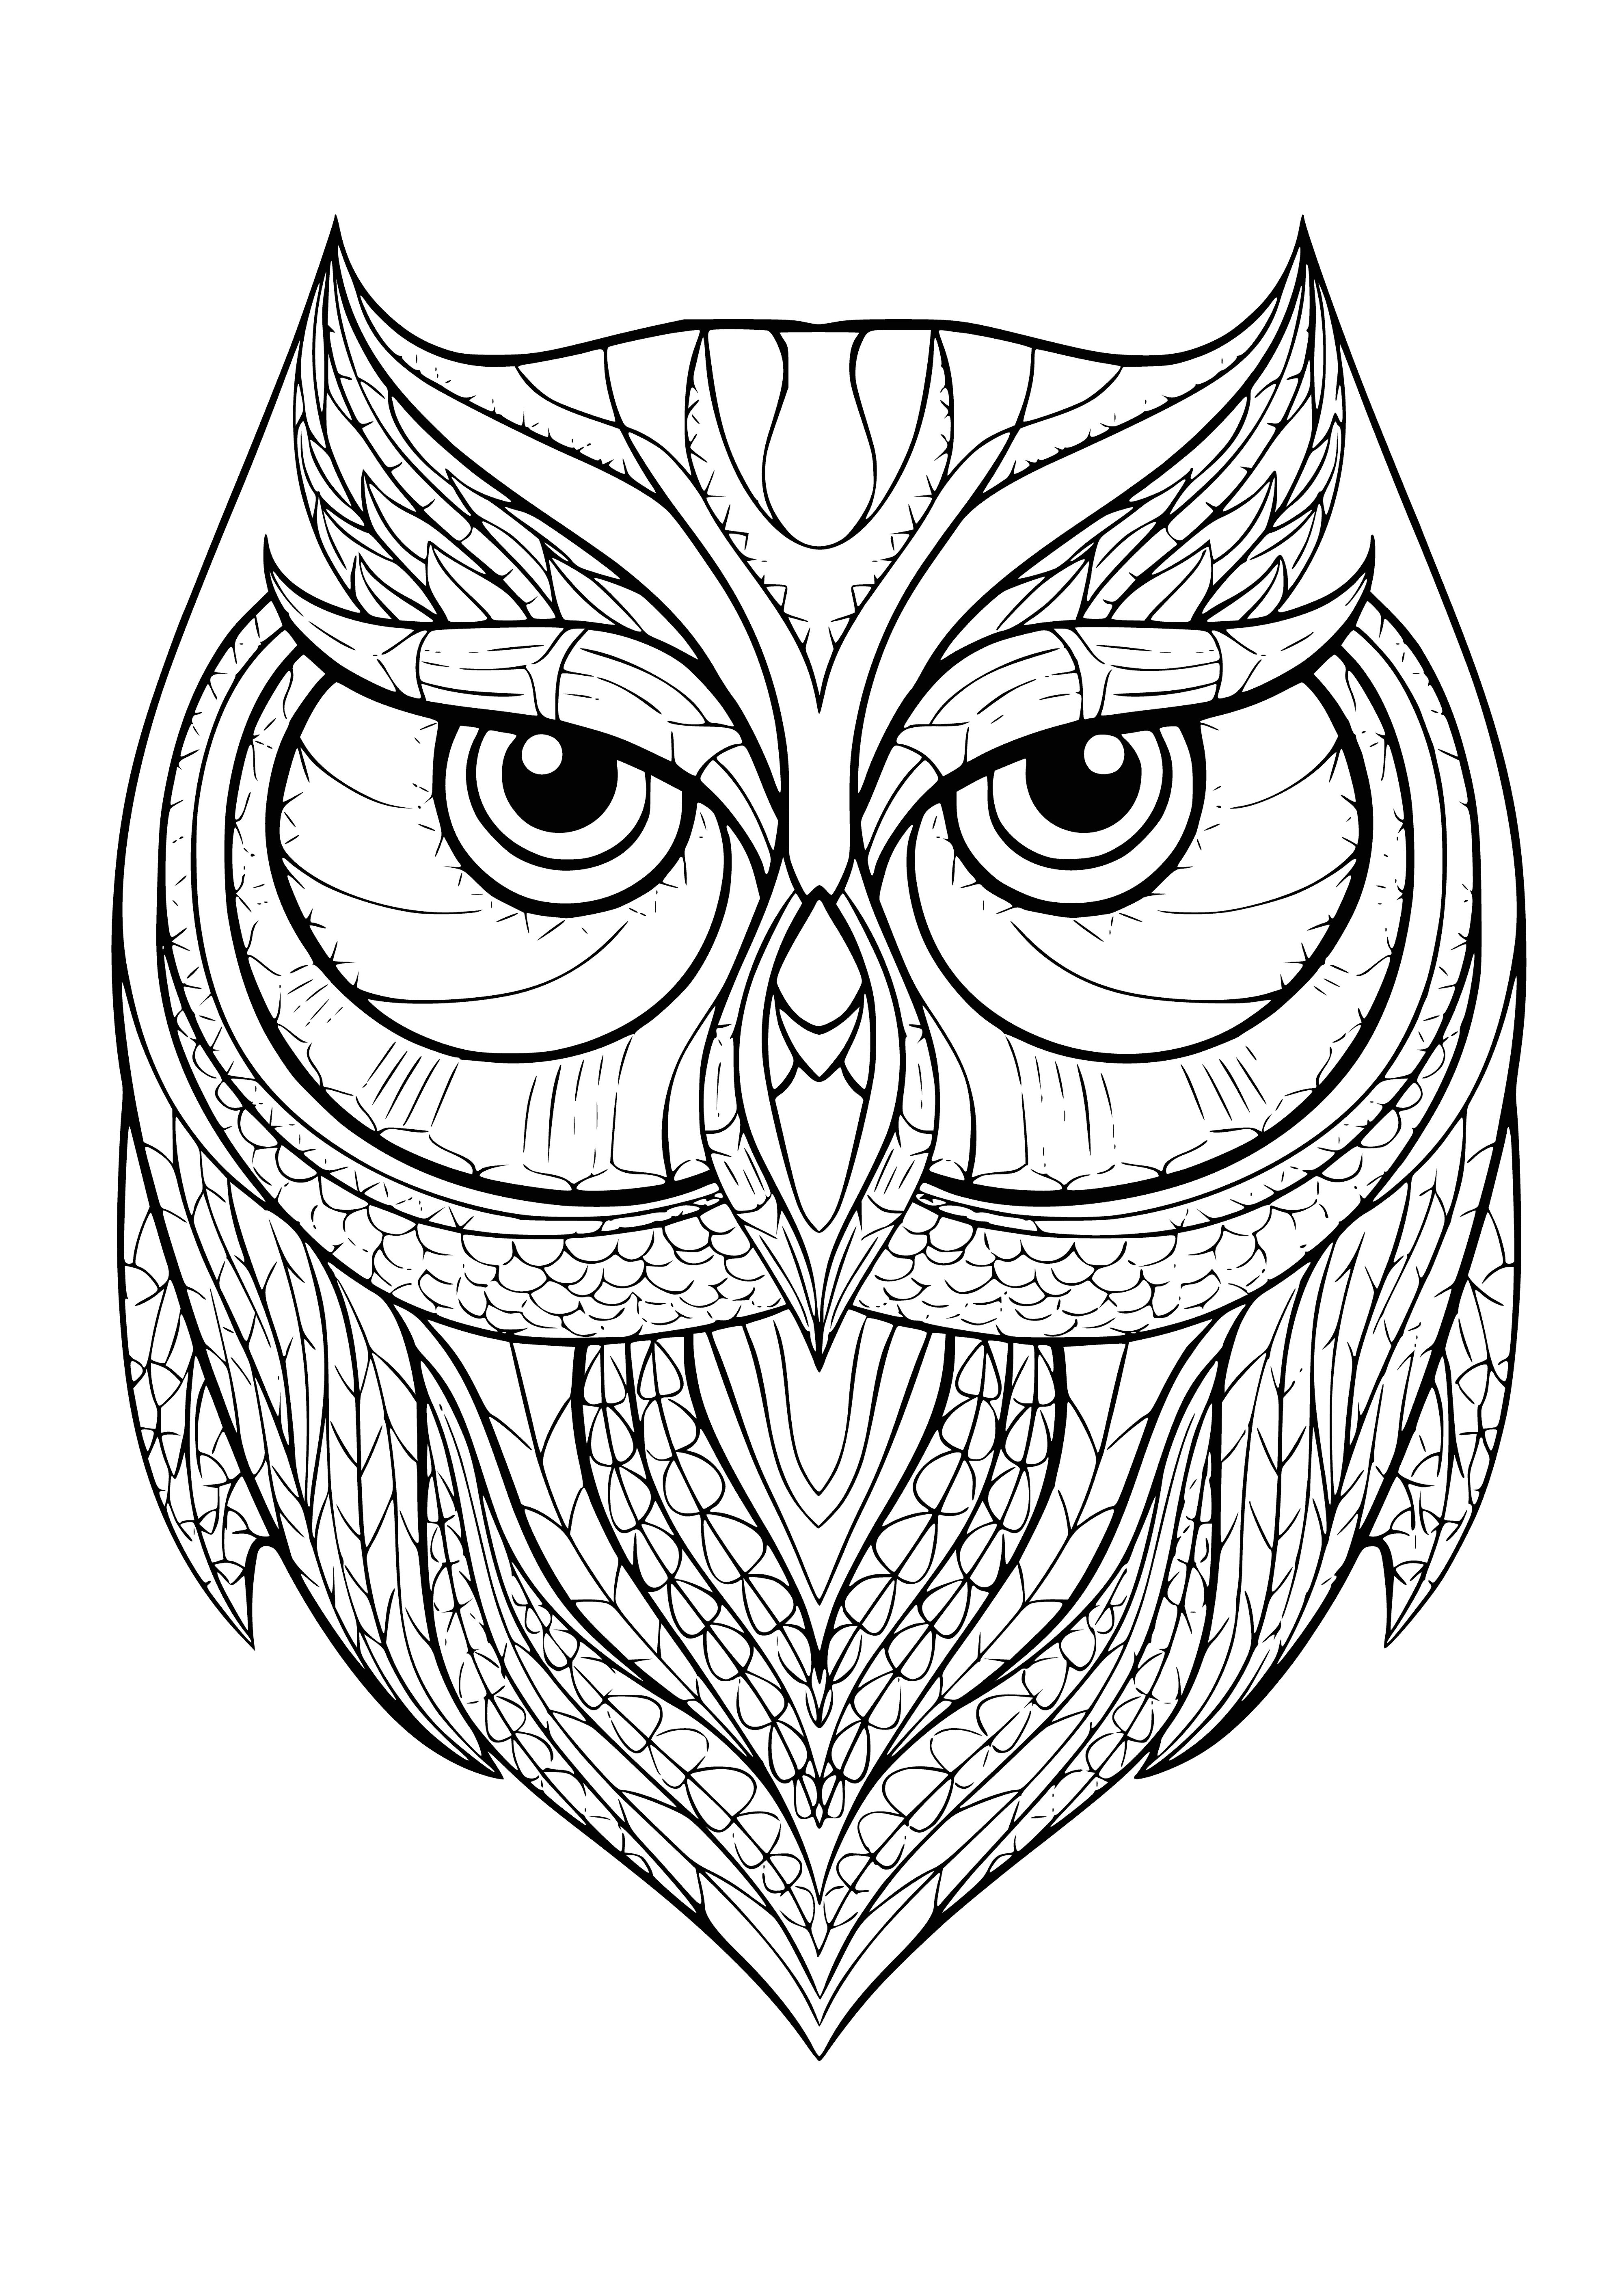 Wise Owl coloring page